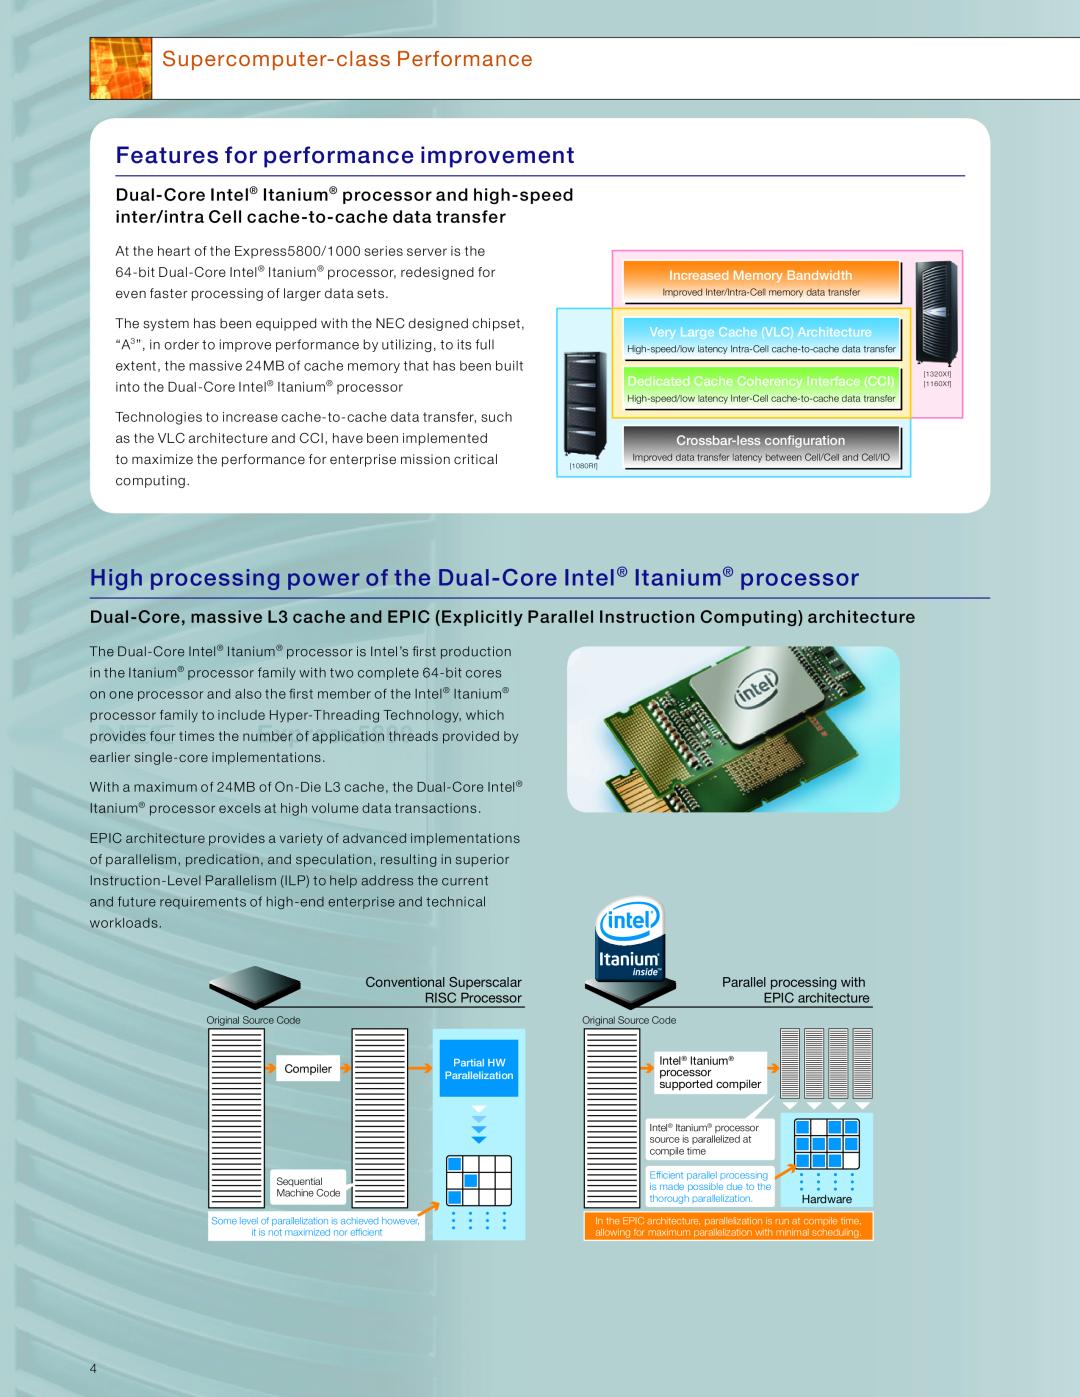 NEC 5800 Series manual Features for performance improvement, High processing power of the Dual-Core Intel Itanium processor 